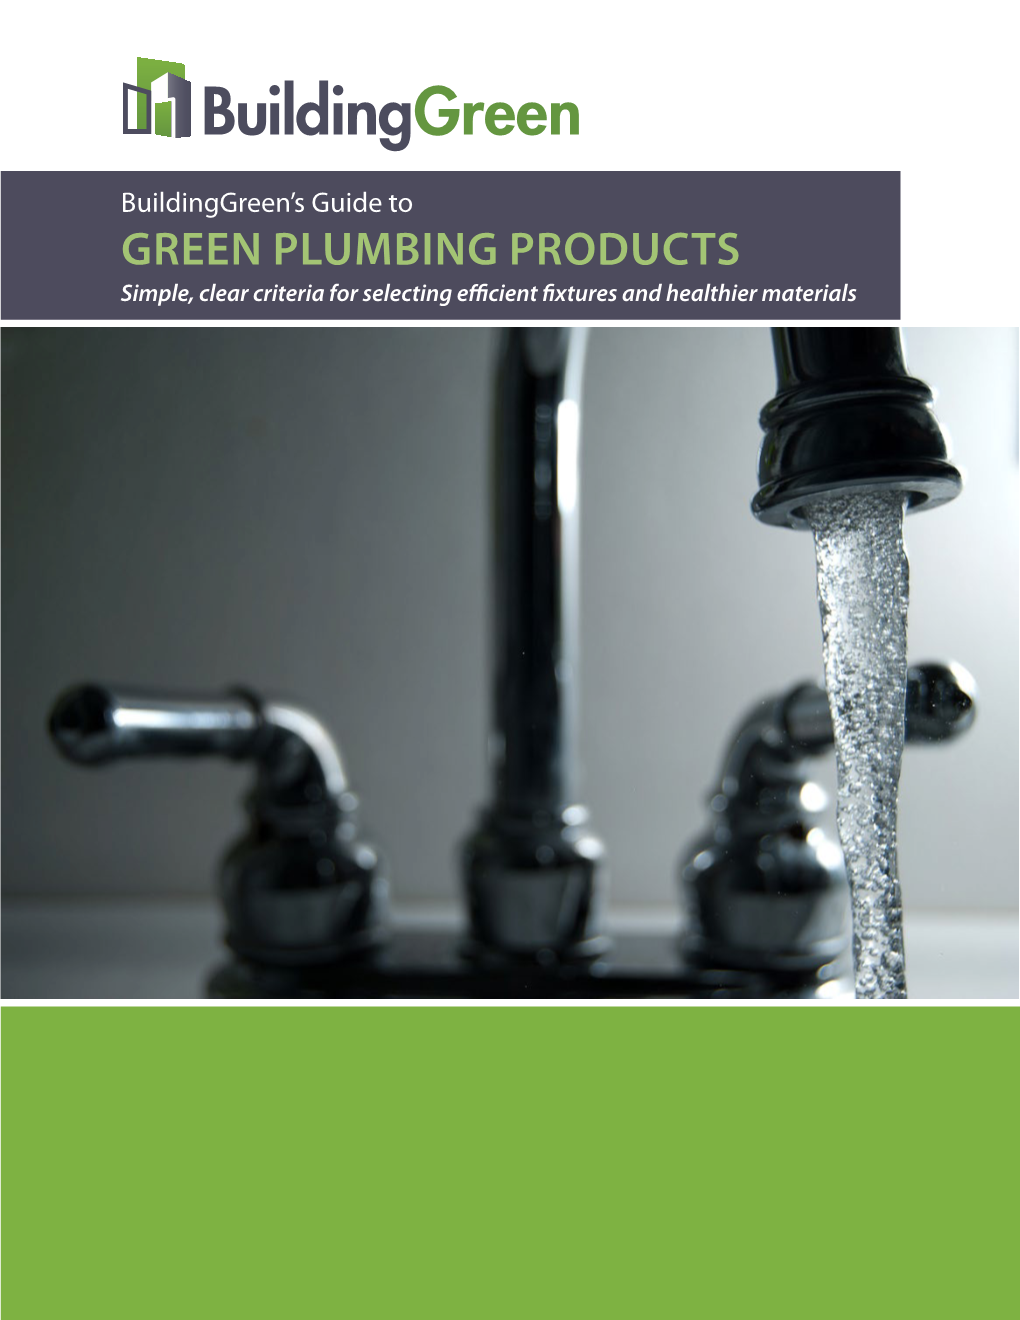 Green Plumbing Products